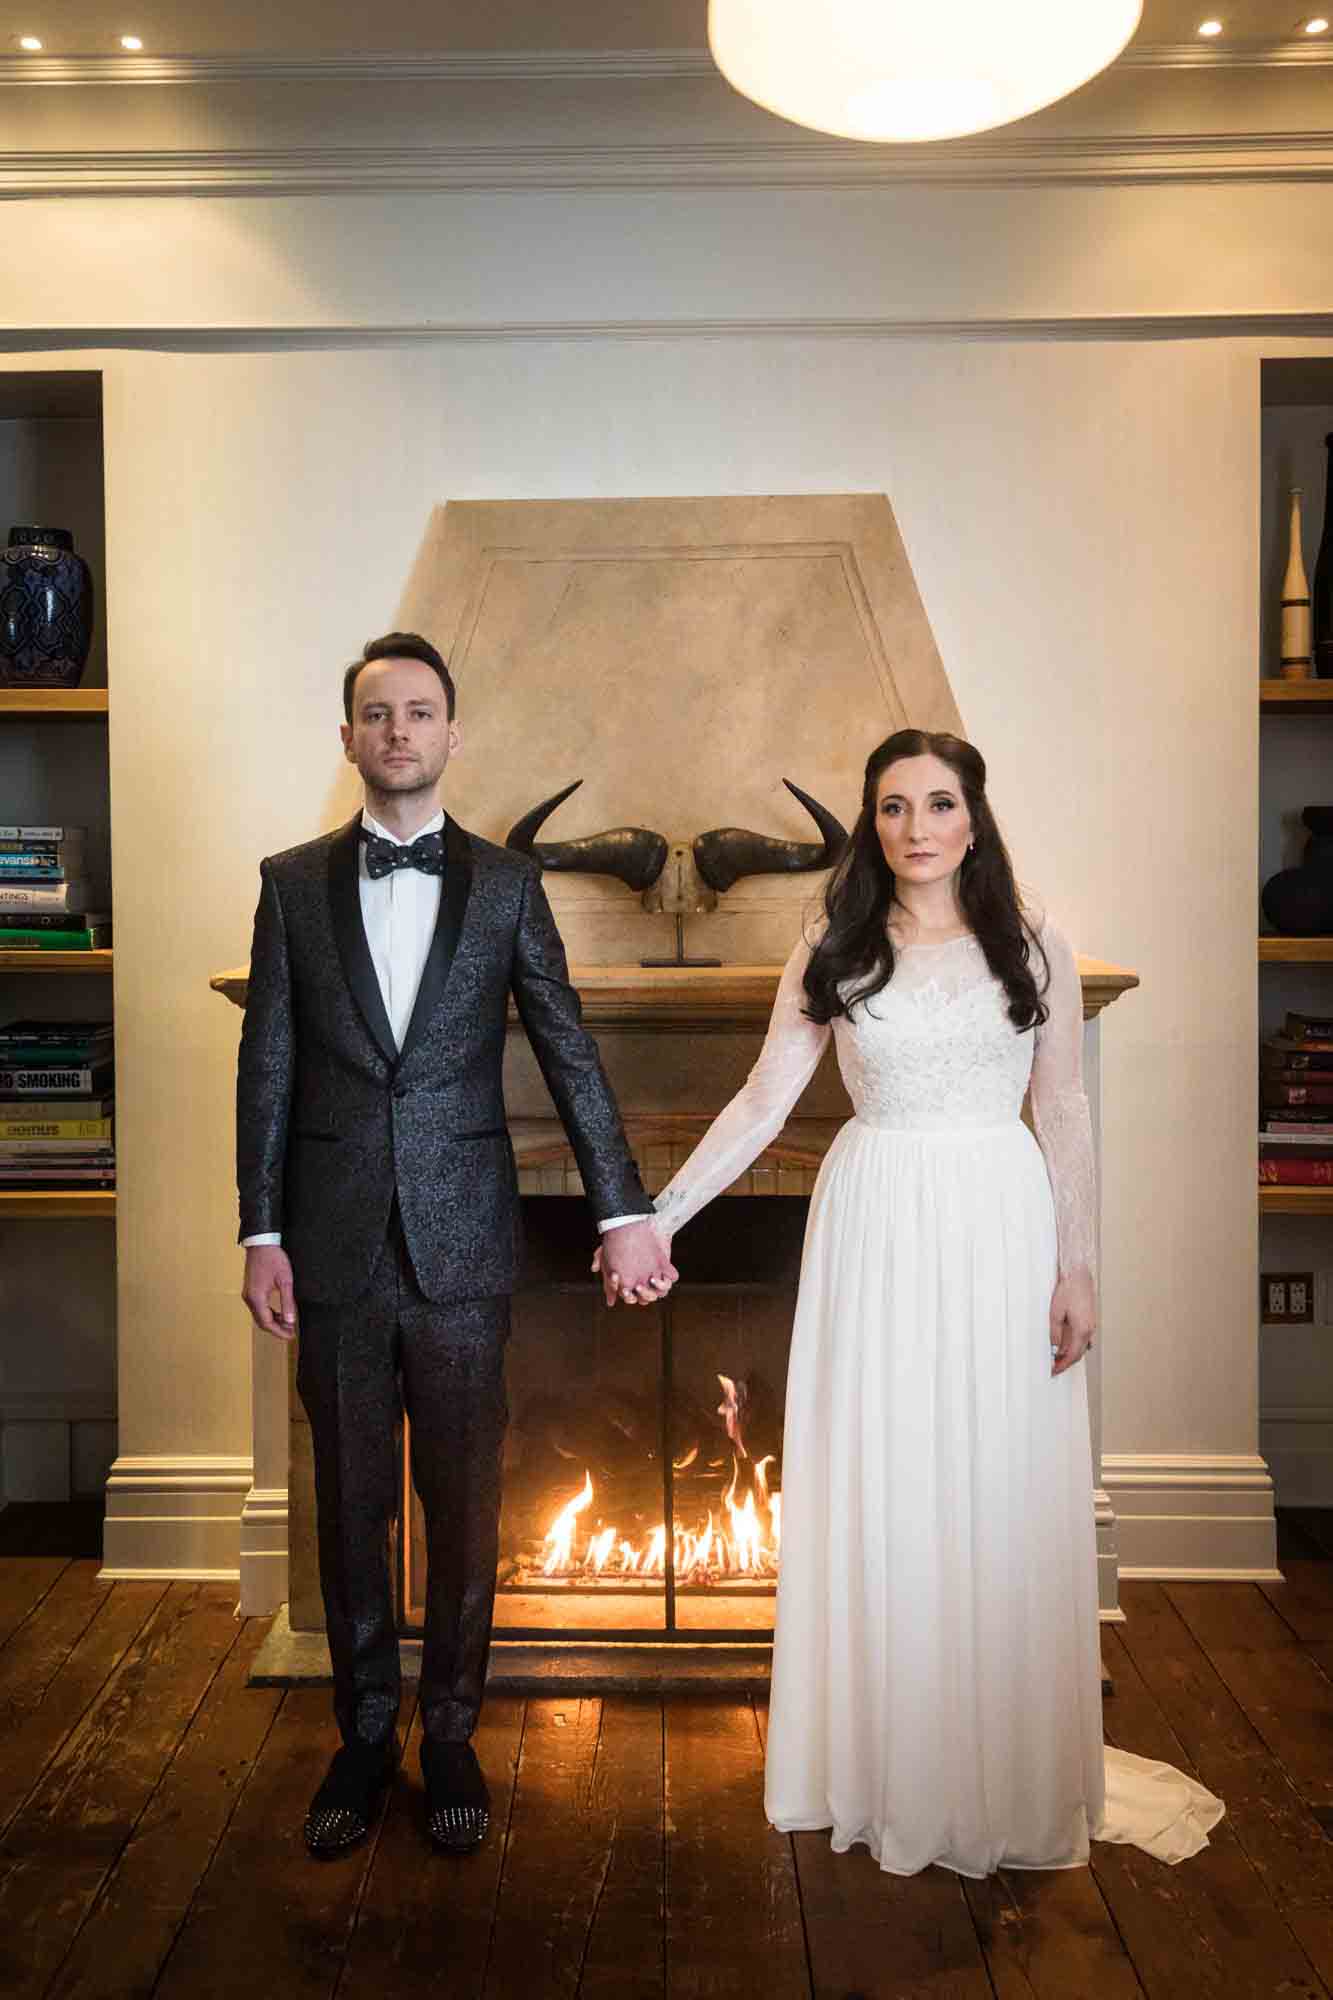 Bride and groom looking stern and holding hands in front of fireplace